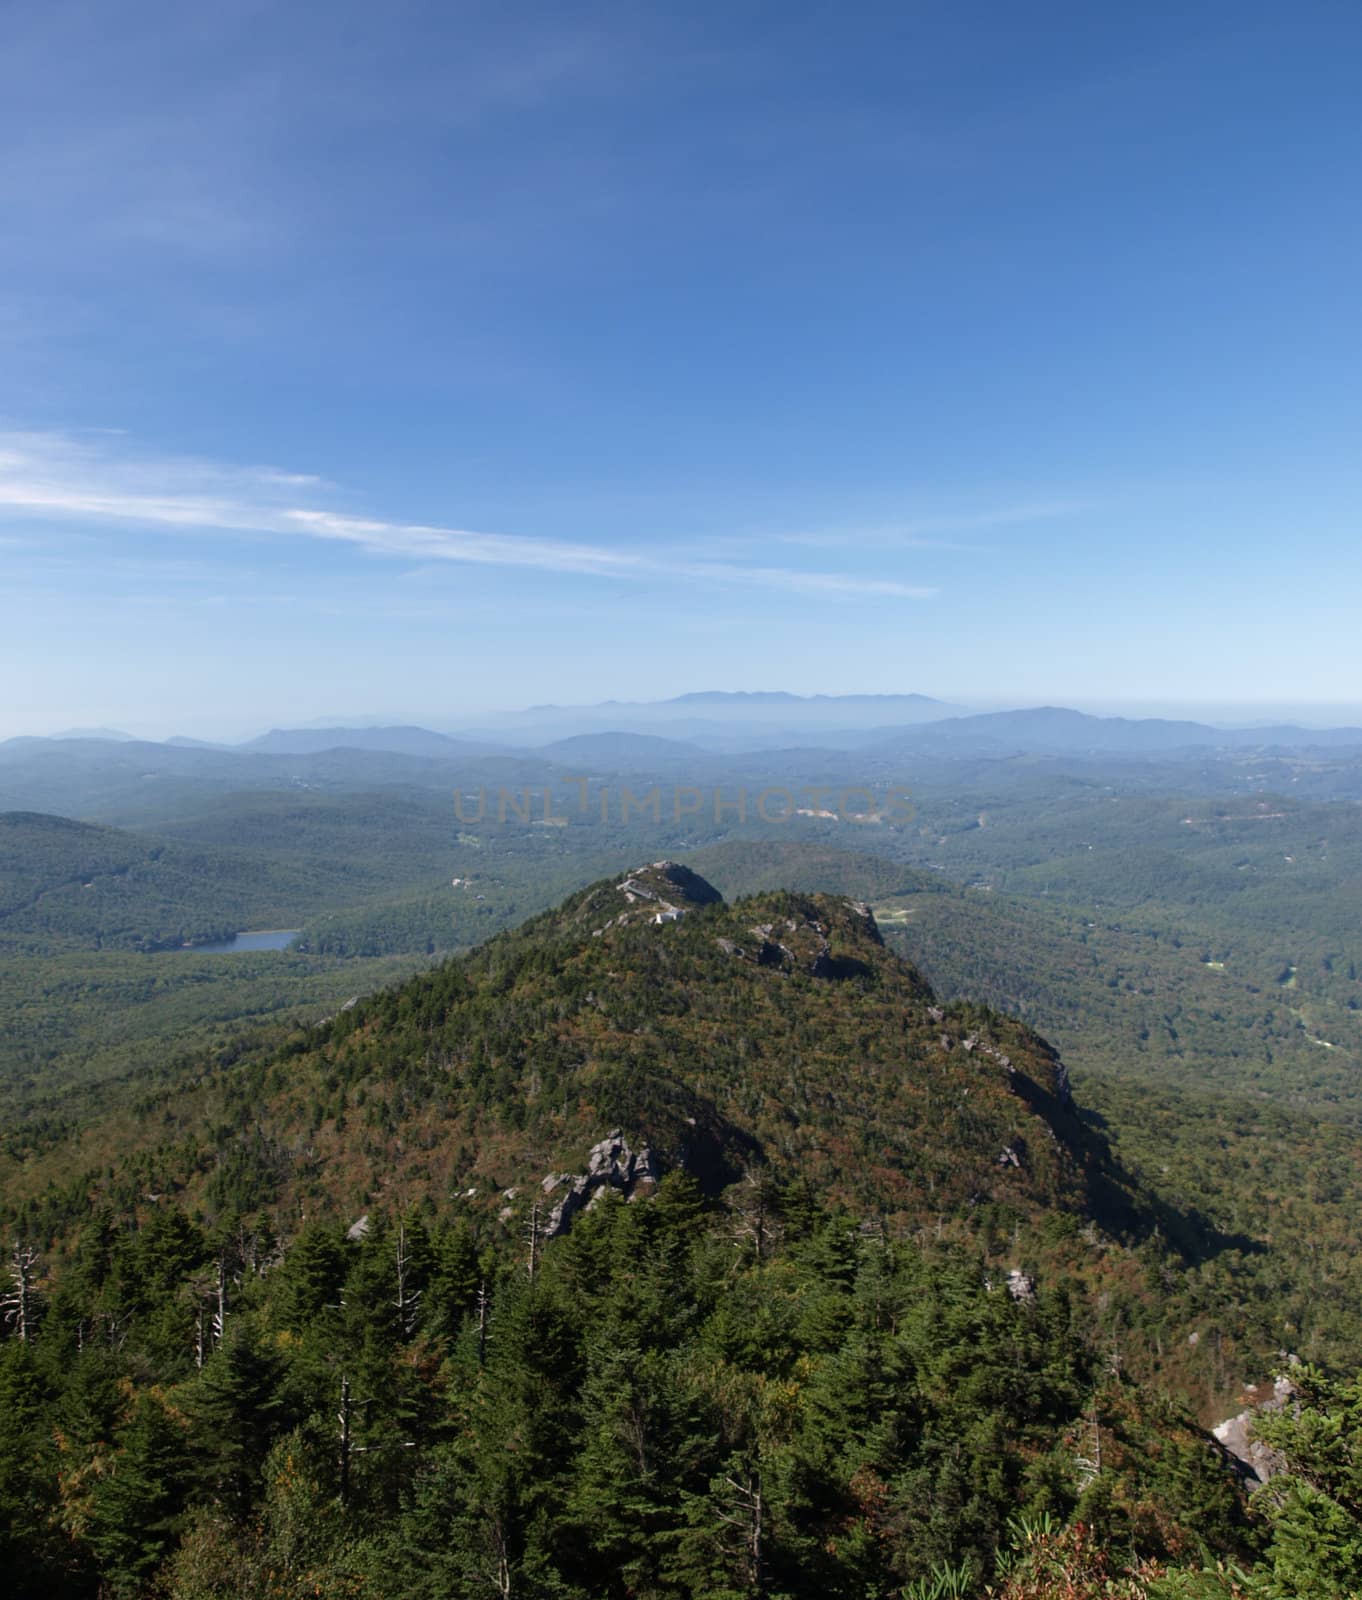 Along the trail at Grandfather mountain in North Carolina